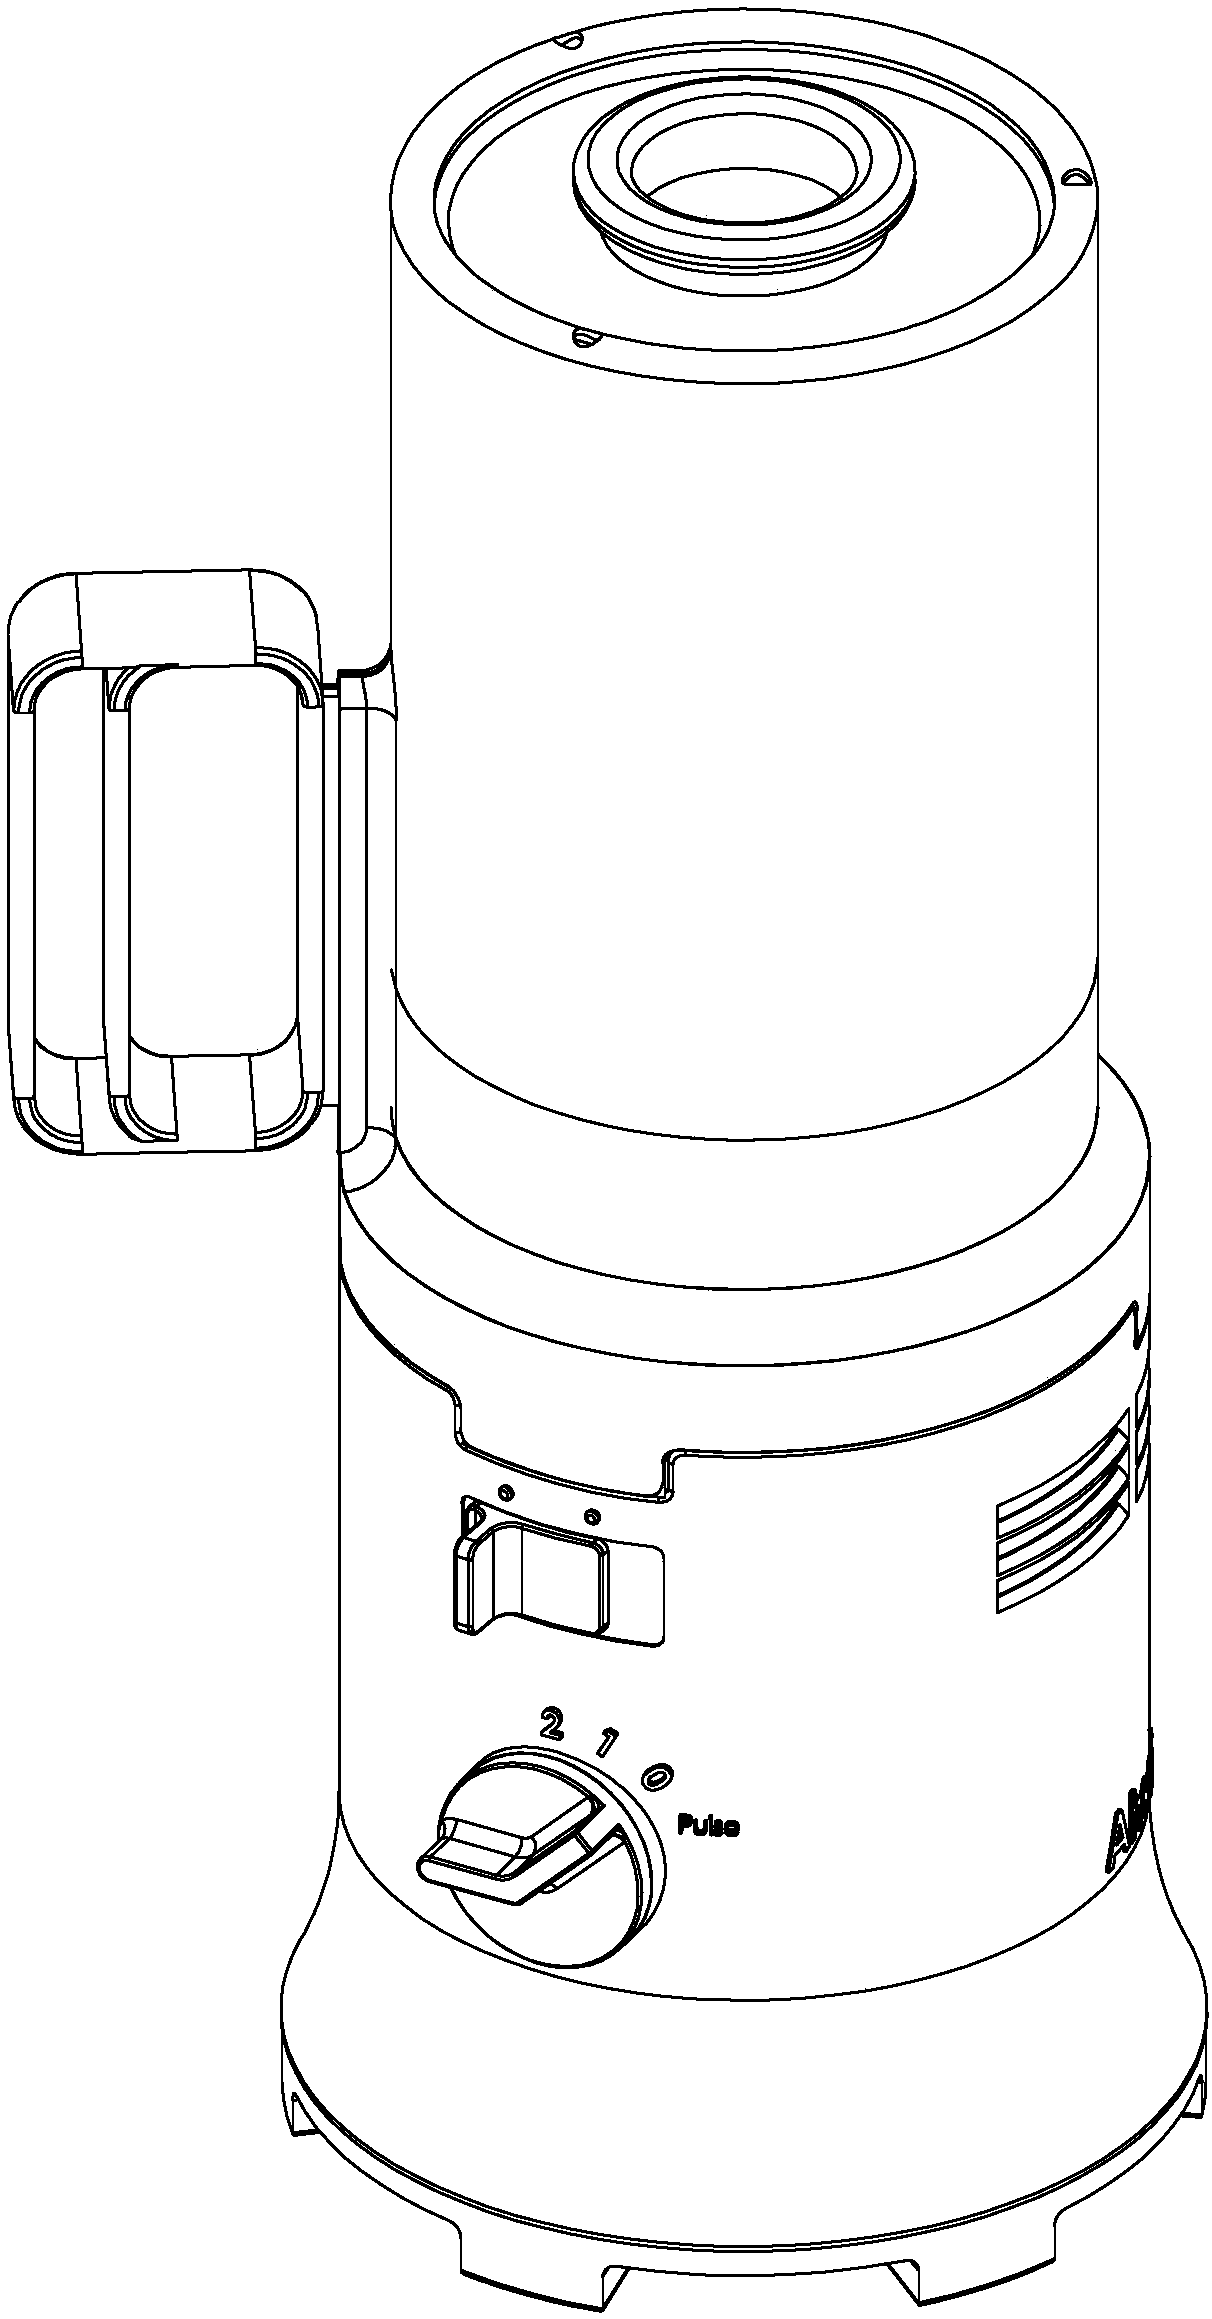 Juicer with waterproof safety switch